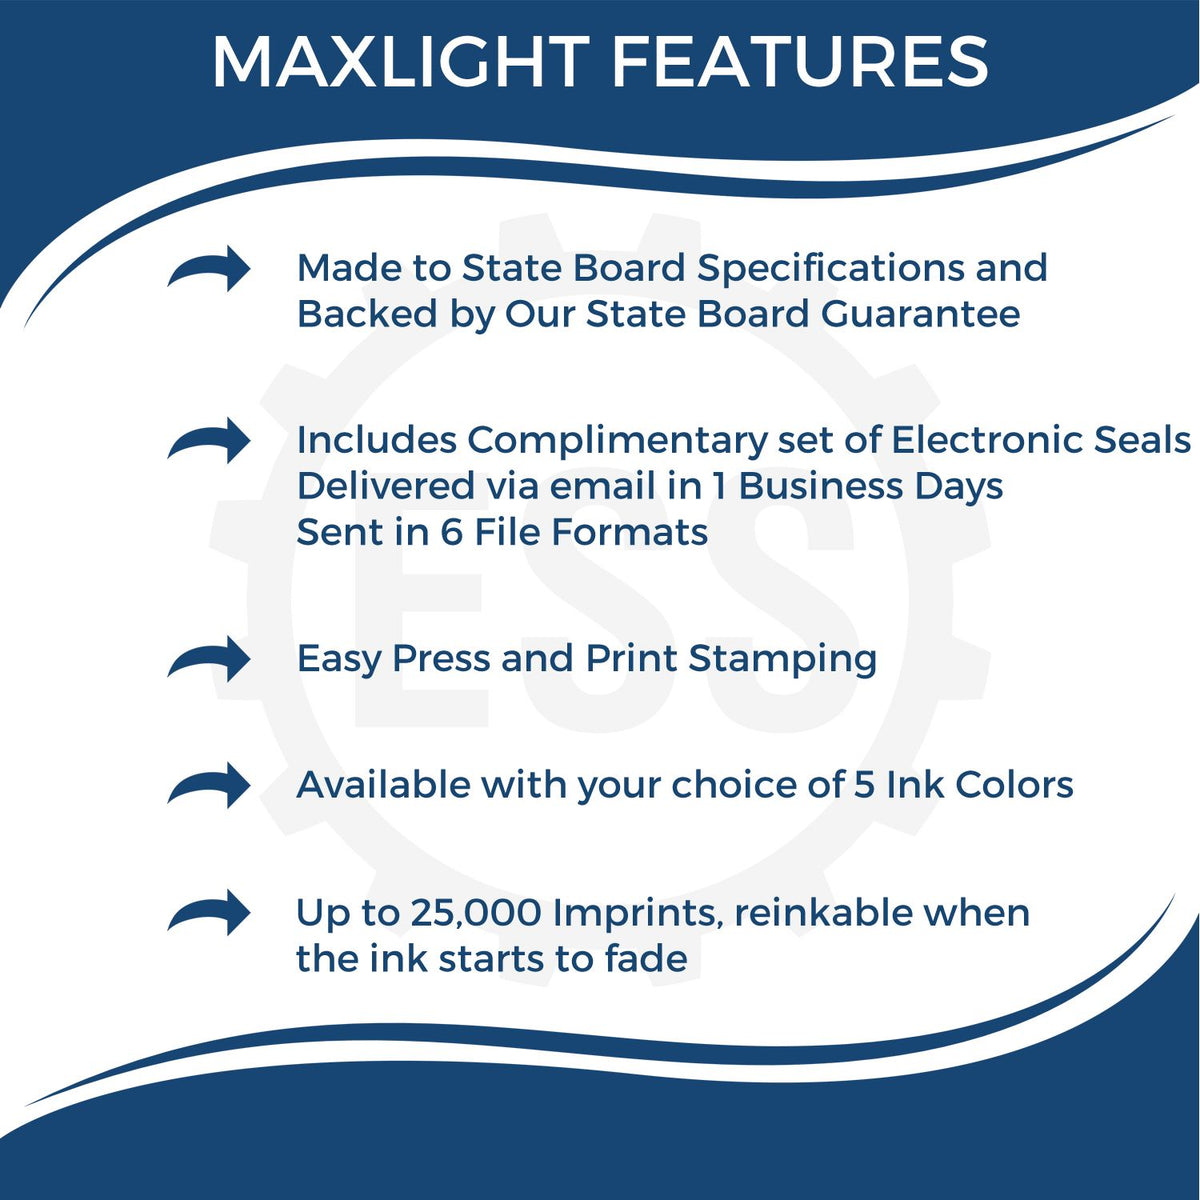 A picture of an infographic highlighting the selling points for the Premium MaxLight Pre-Inked Missouri Geology Stamp